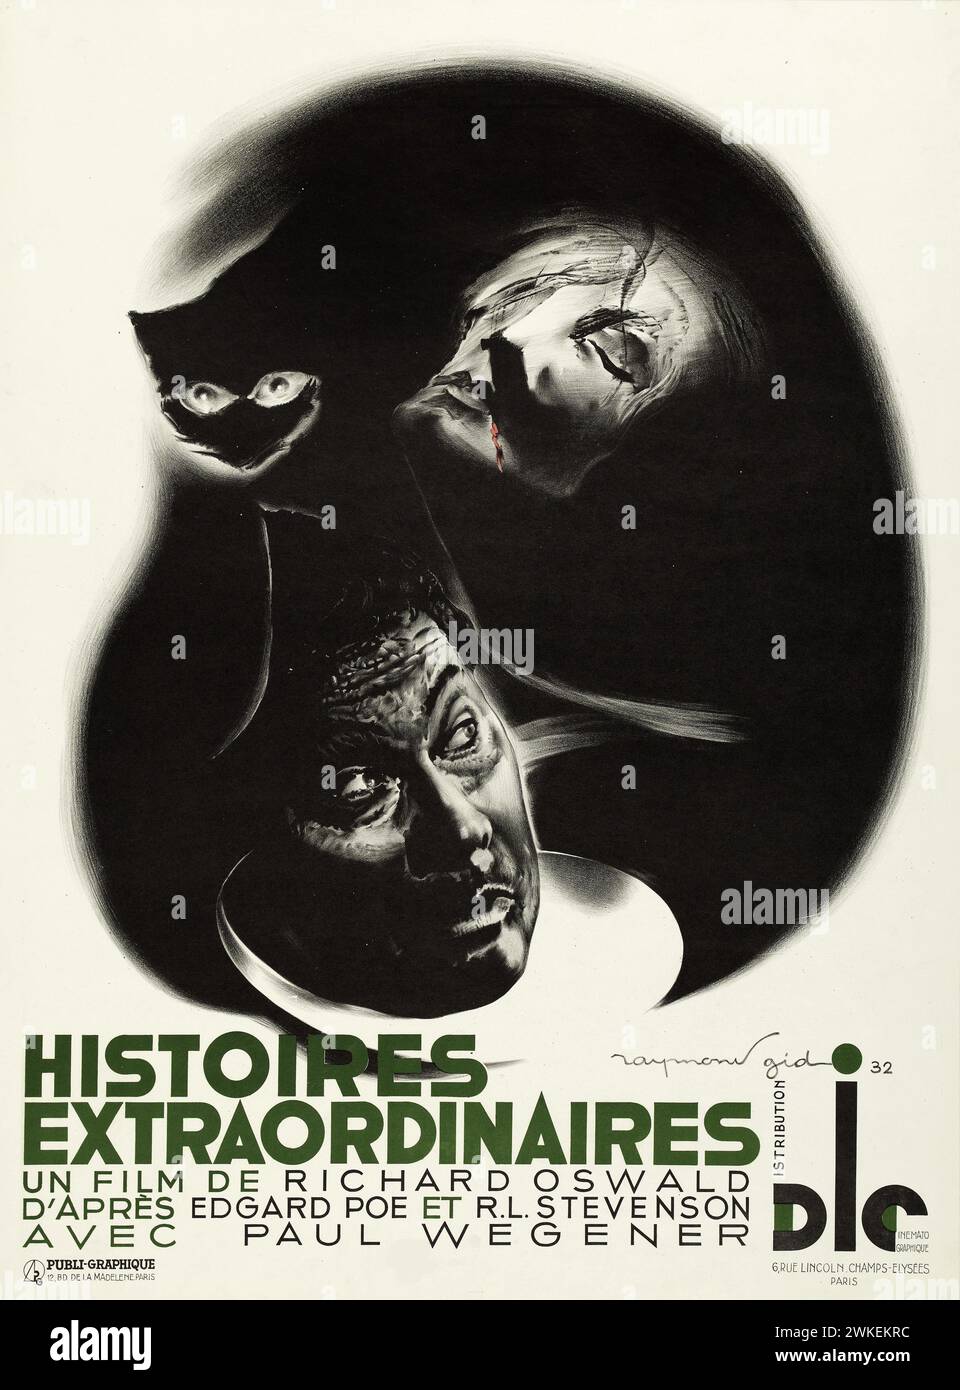 Movie poster 'Eerie Tales (Histoires extraordinaires)' von Richard Oswald. Museum: PRIVATE COLLECTION. Author: Raymond Gid. Stock Photo